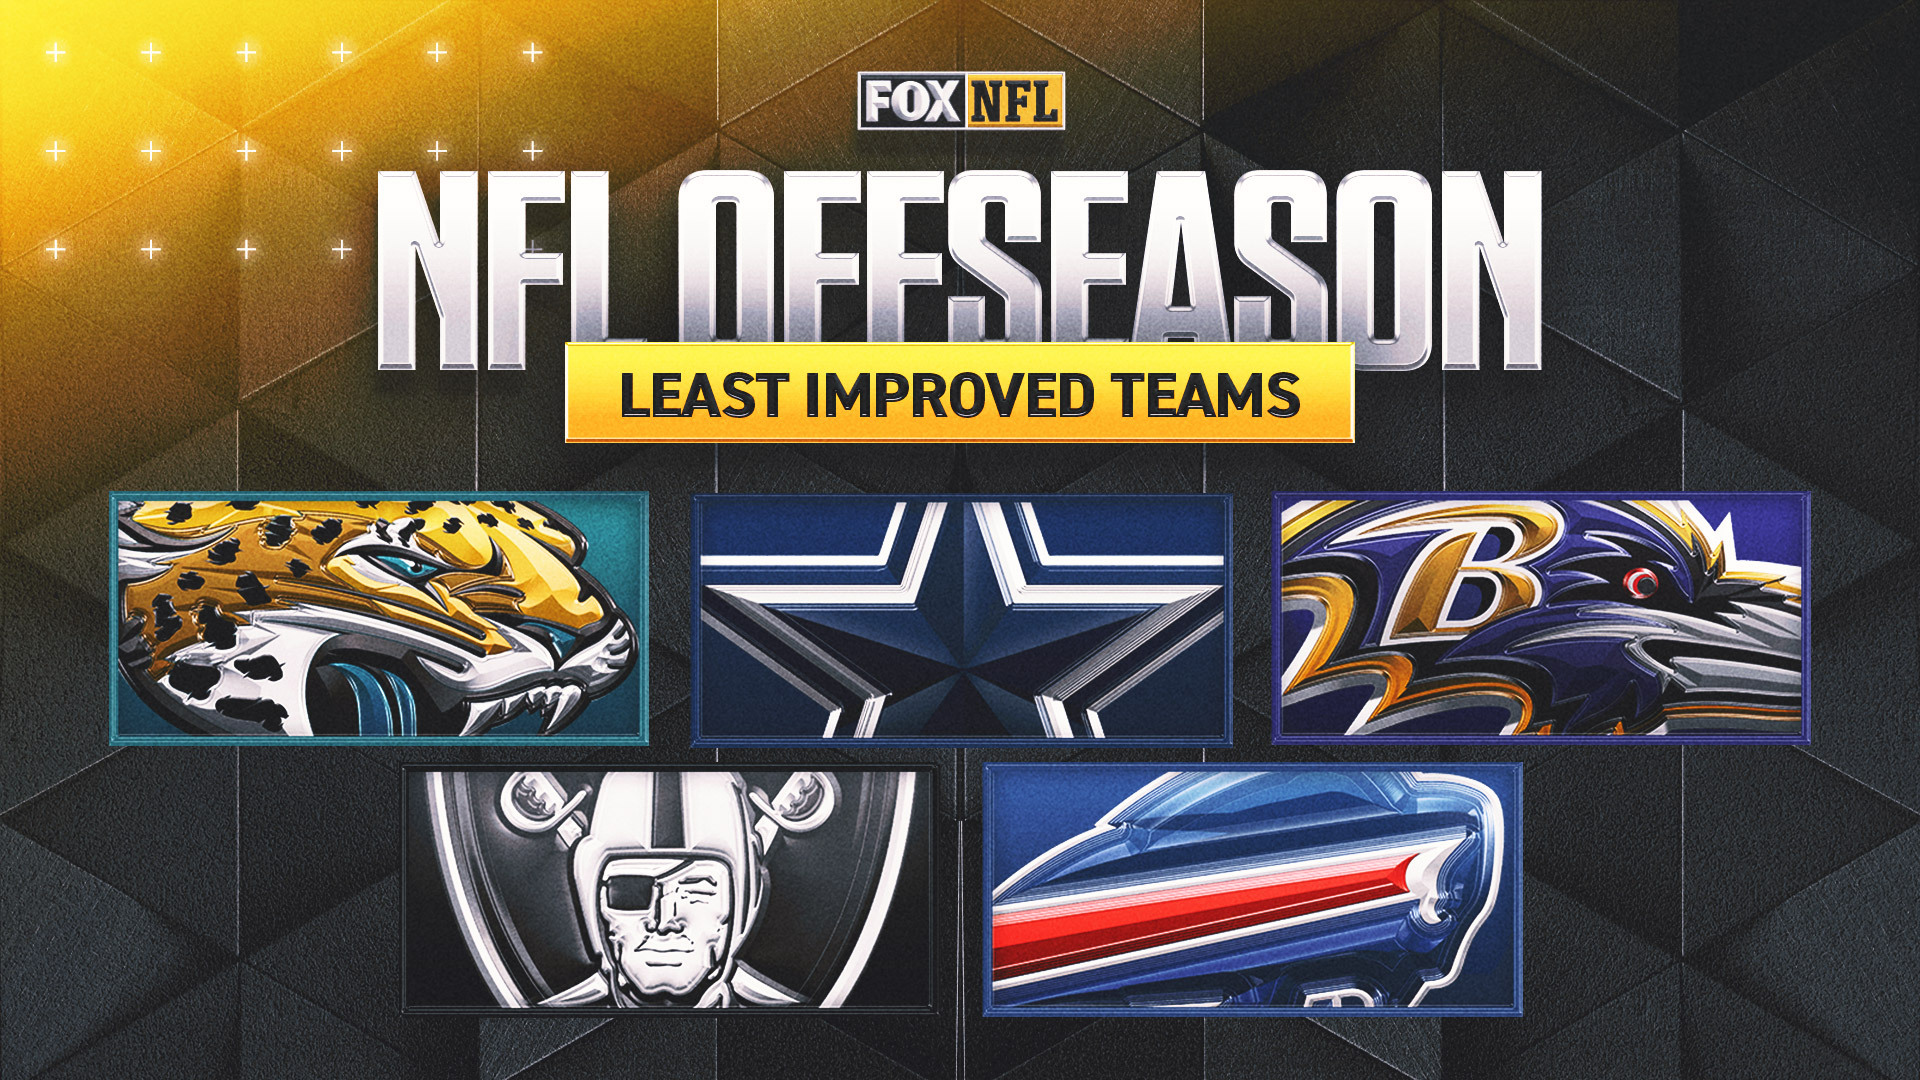 NFL's 5 least improved teams of the offseason: Cowboys or Bills more disappointing?